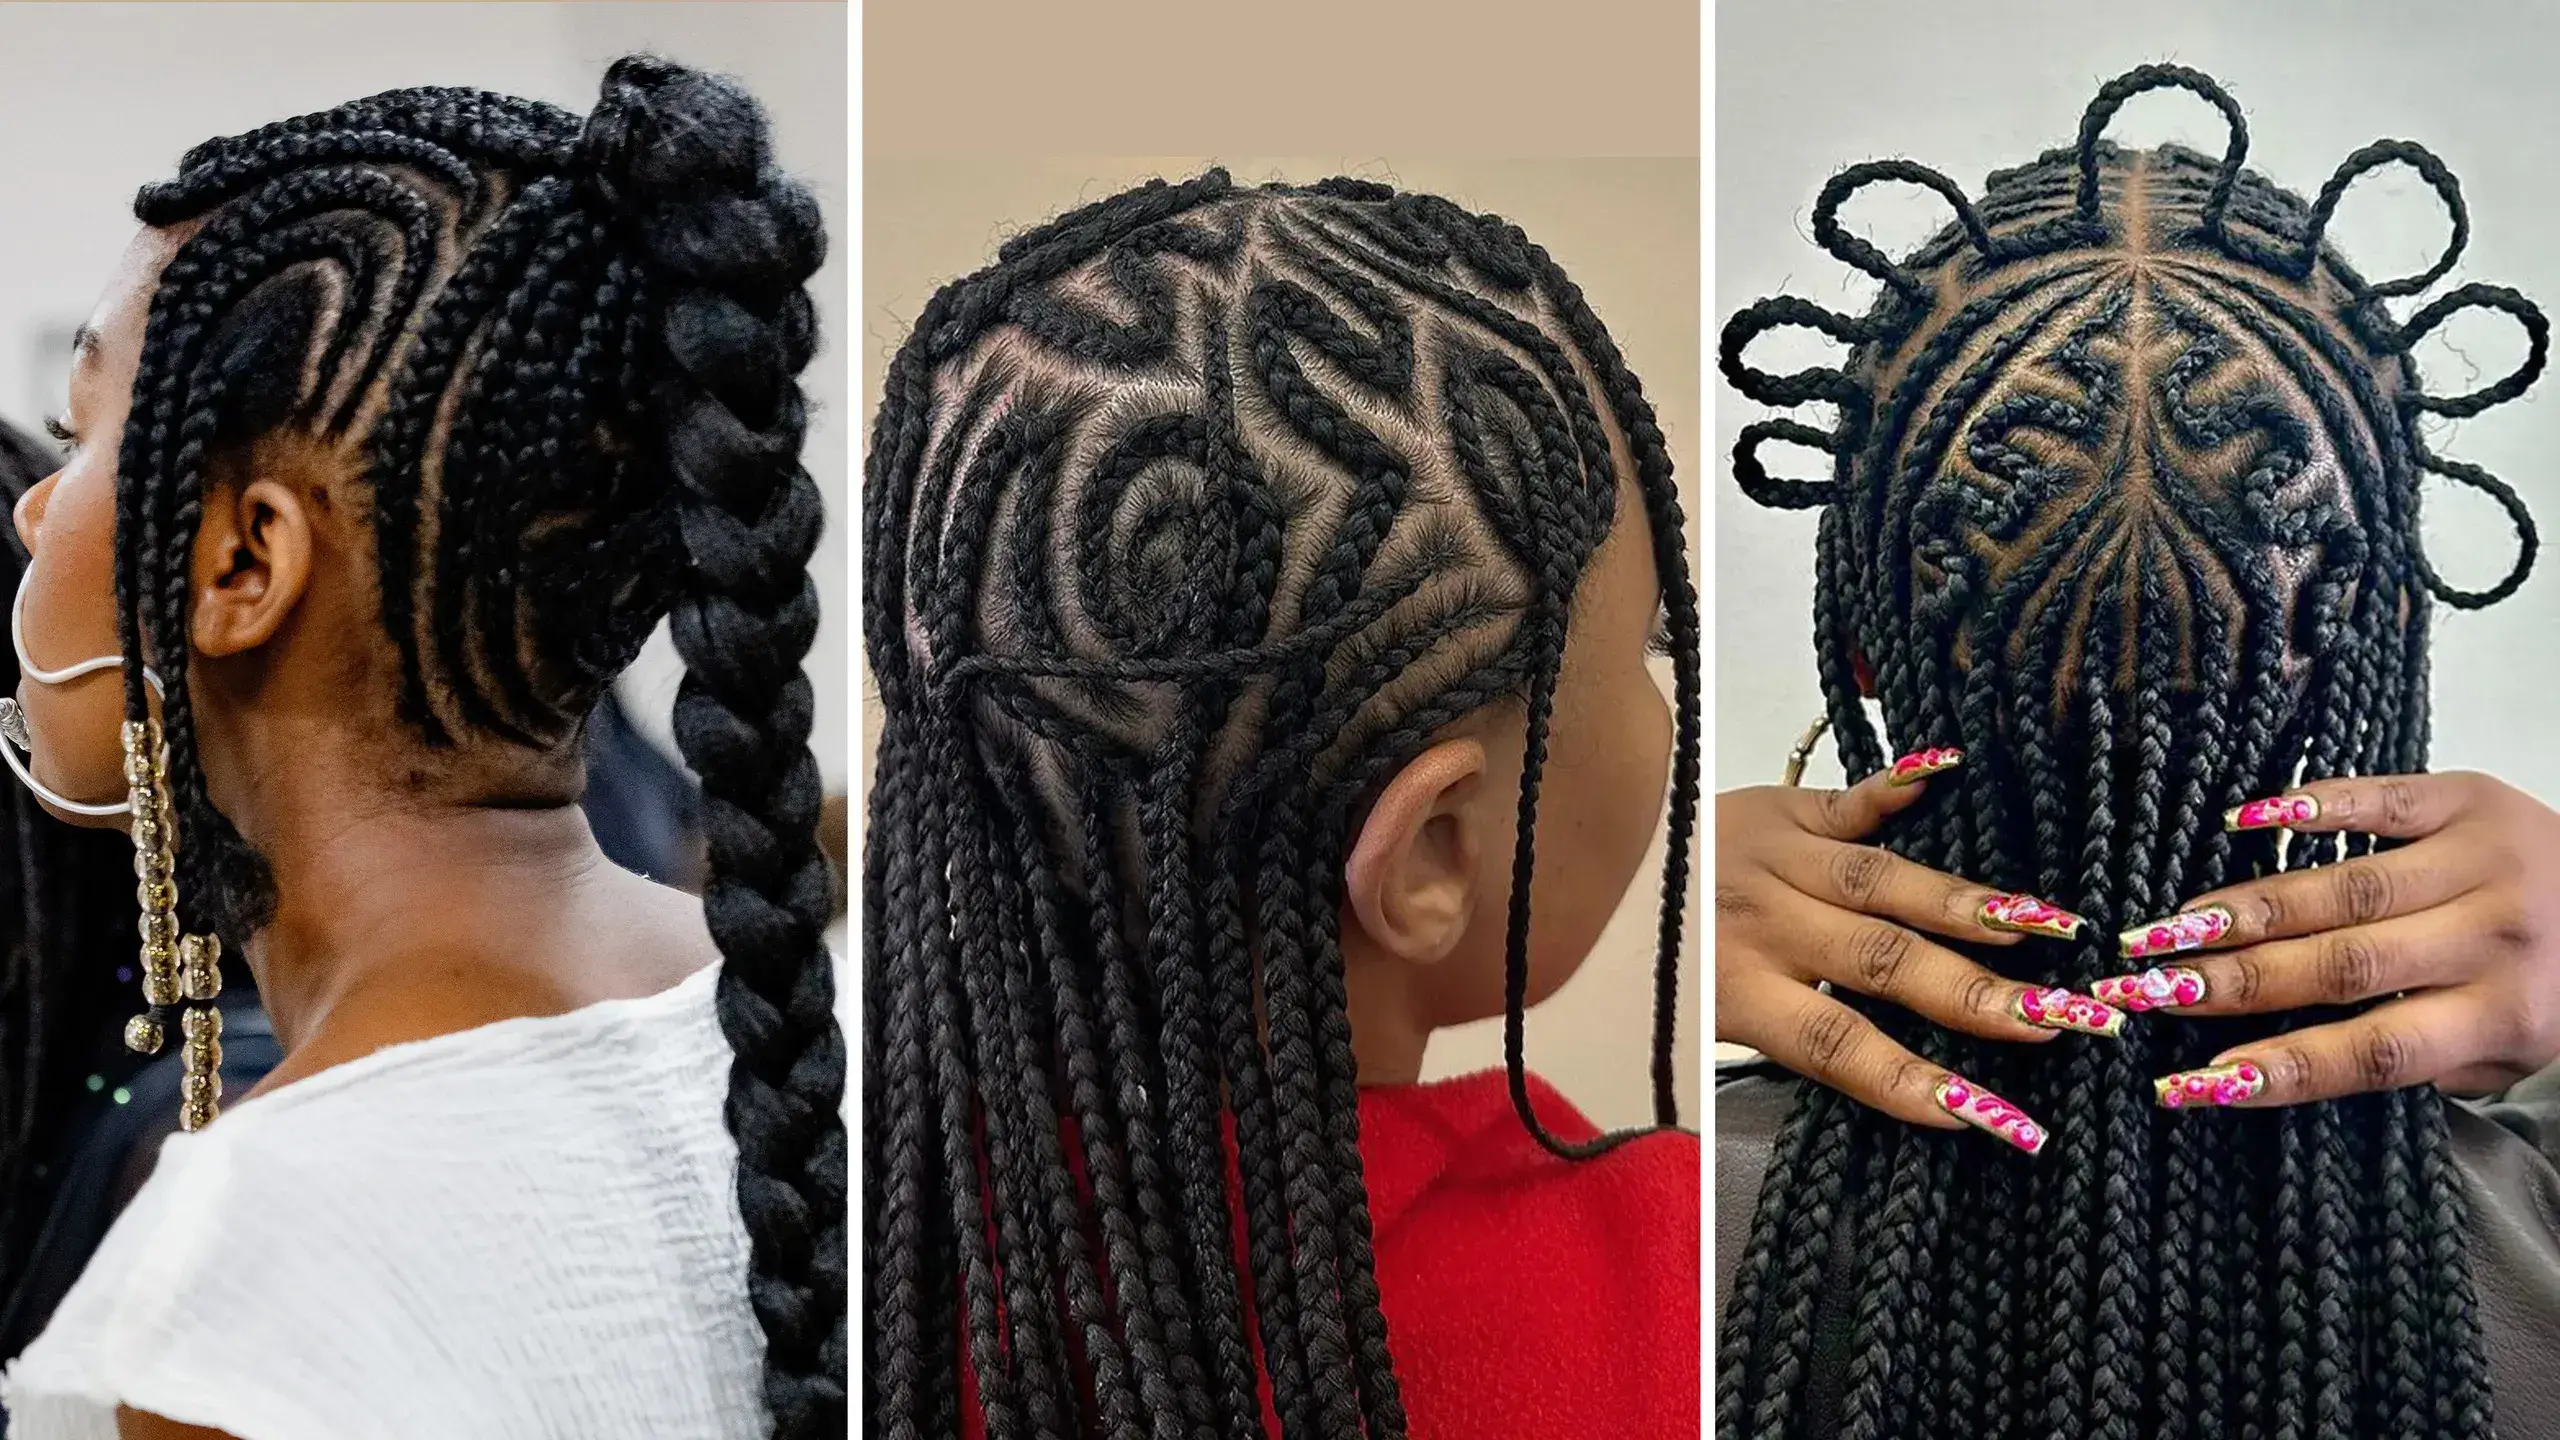 Three styles of intricate braided hairstyles.